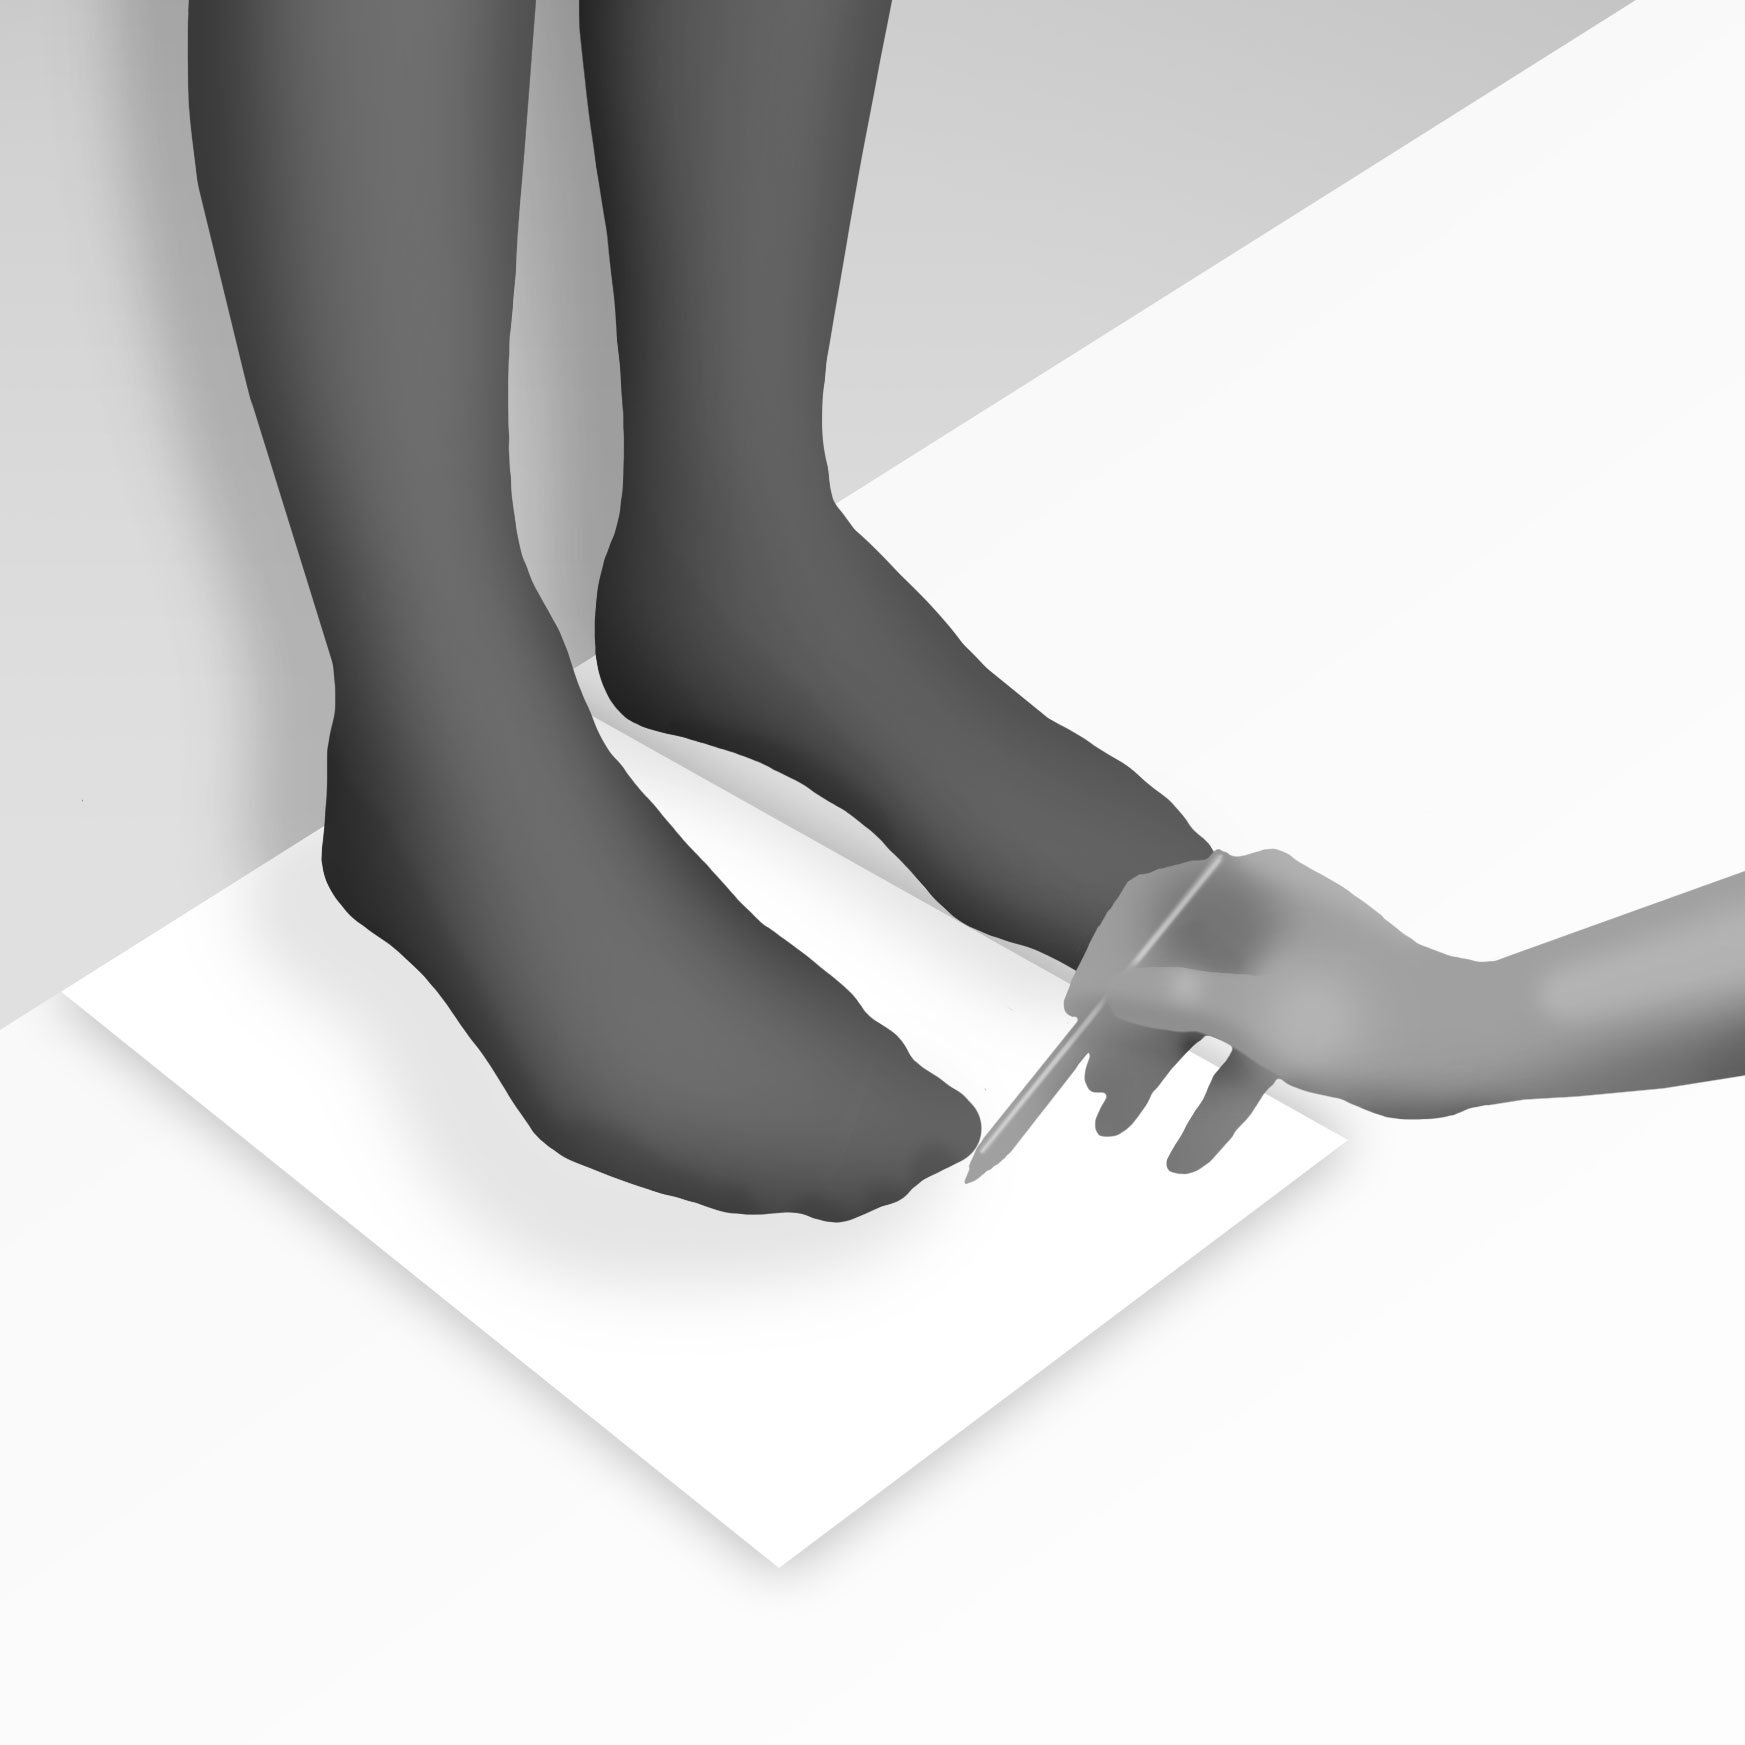 Diagram for 'Step 2' - Feet on a sheet of paper with heels pressed up against the wall and person marking paper at tip of big toe with a pencil